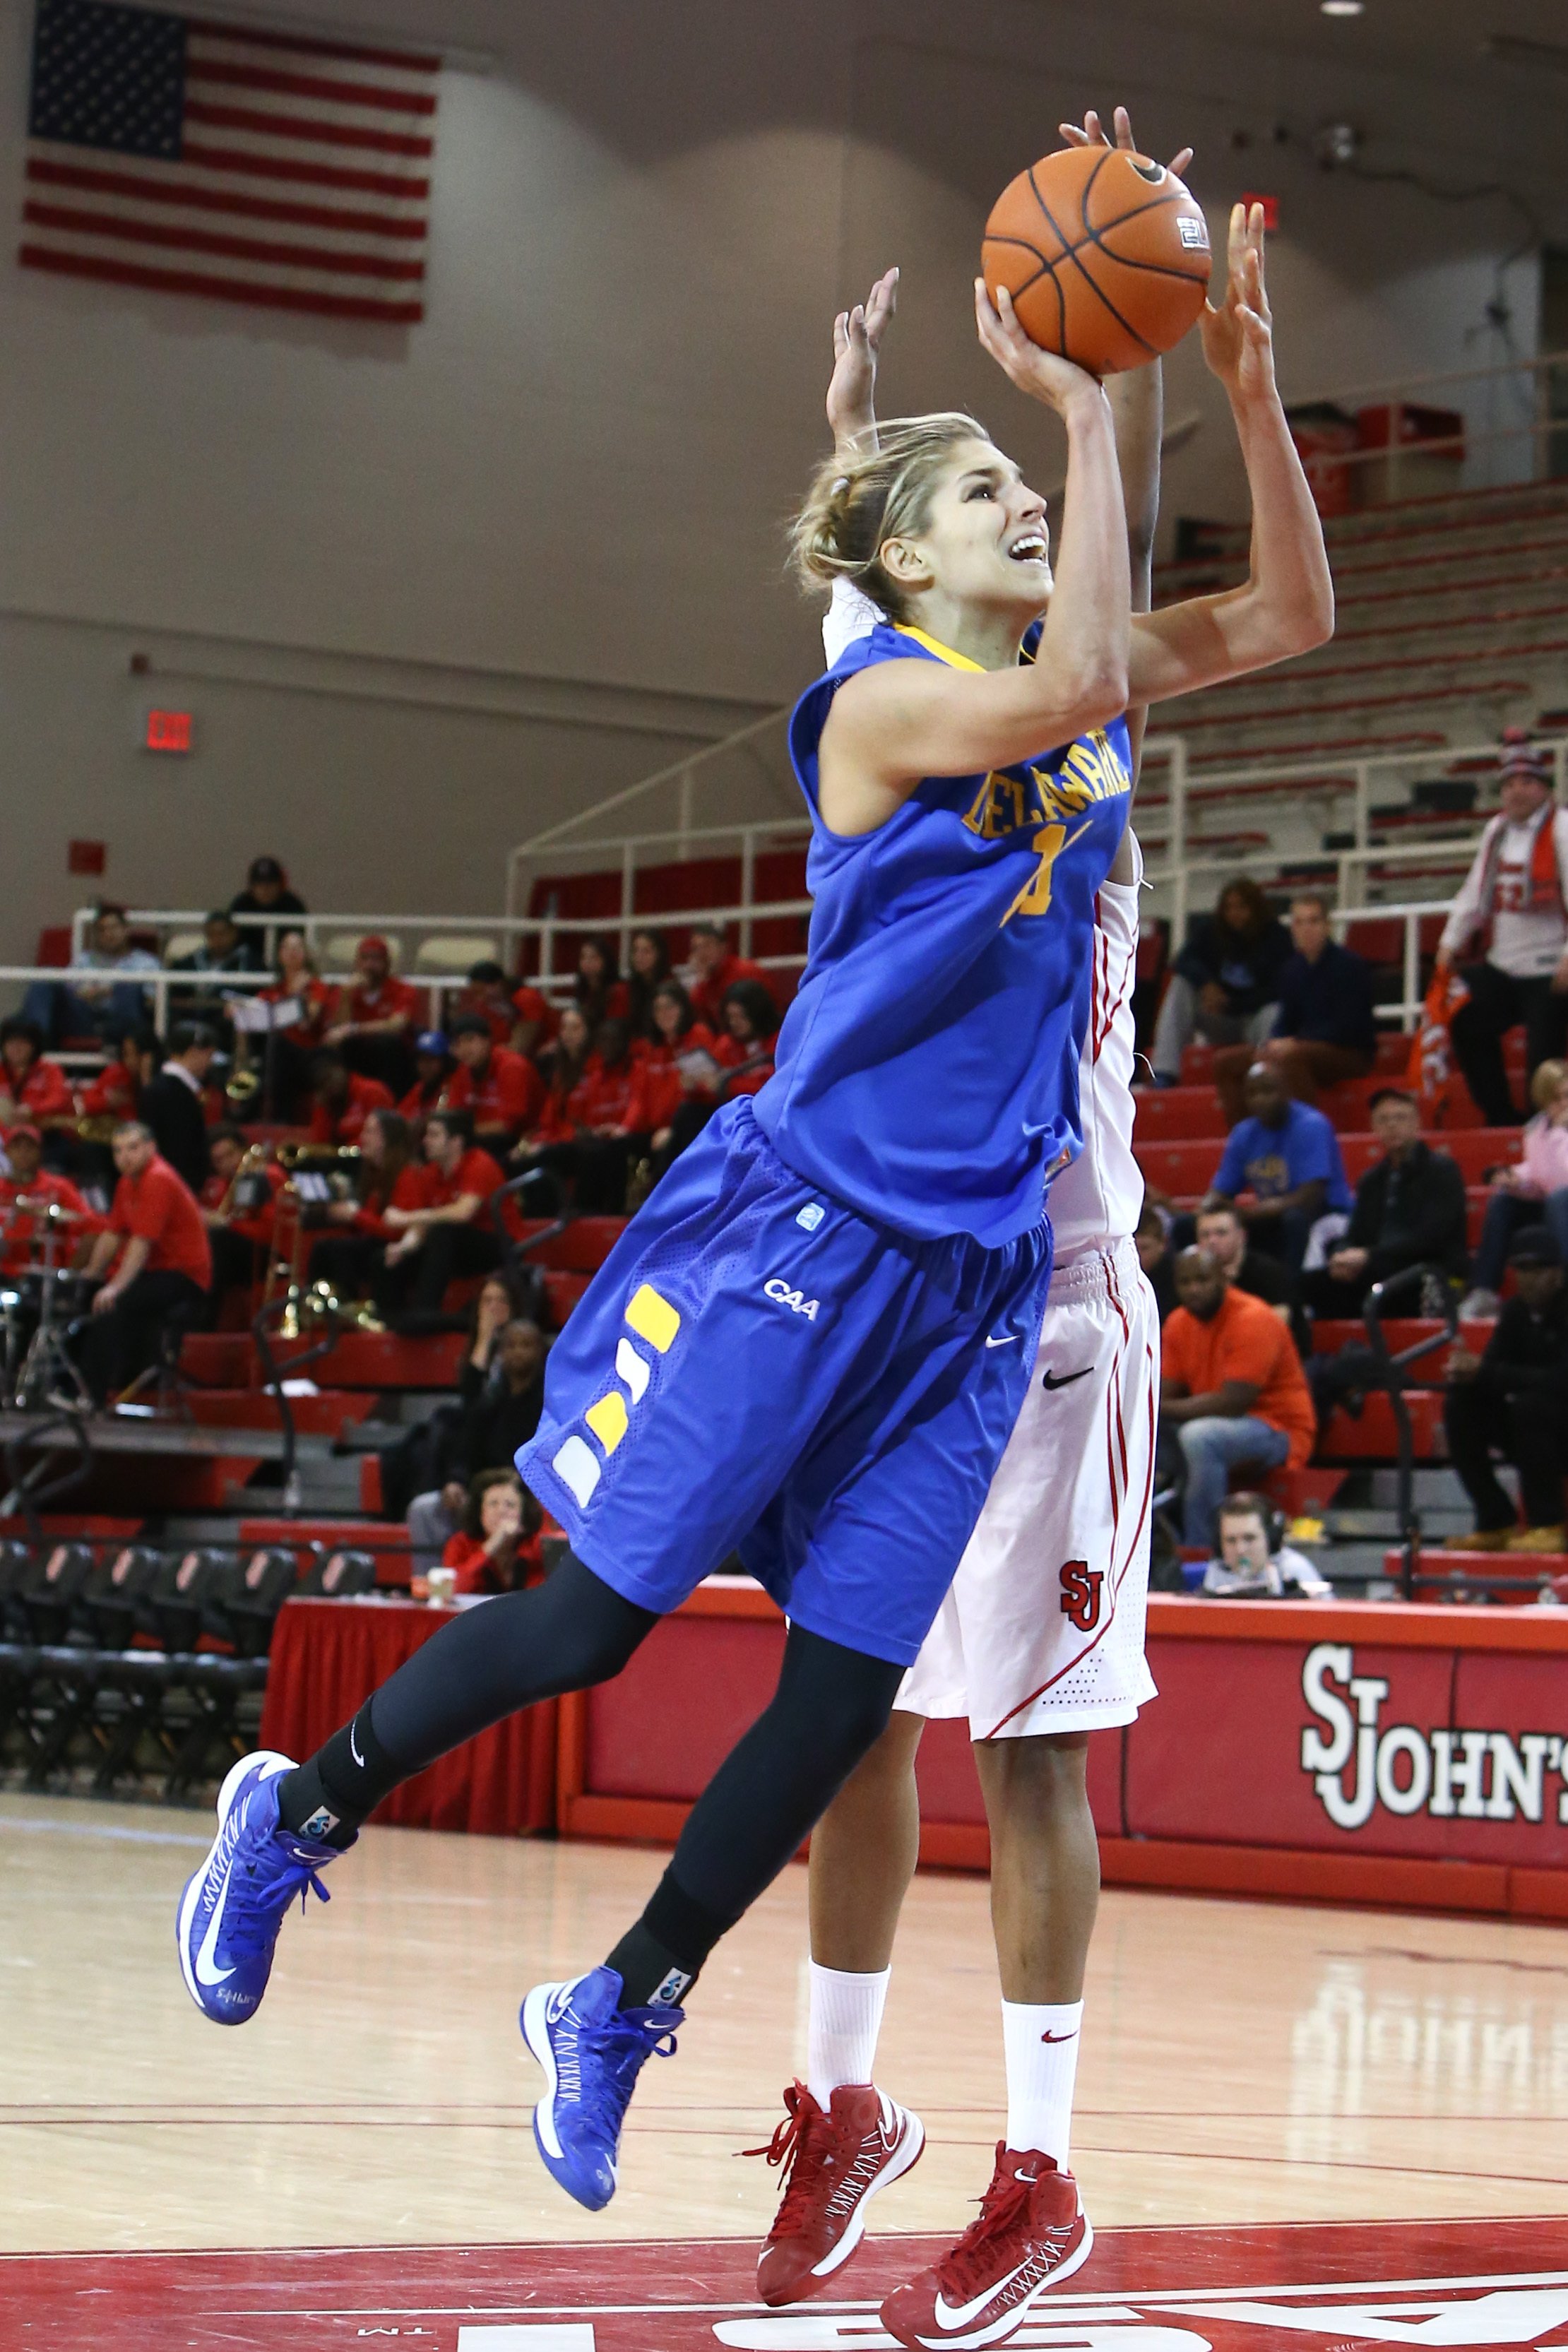 Elena Delle Donne (11) goes up for a shot against the St. John's Red Storm at Carnesecca Arena on January 2, 2013 in Jamaica, Queens, New York | Photo: Shutterstock